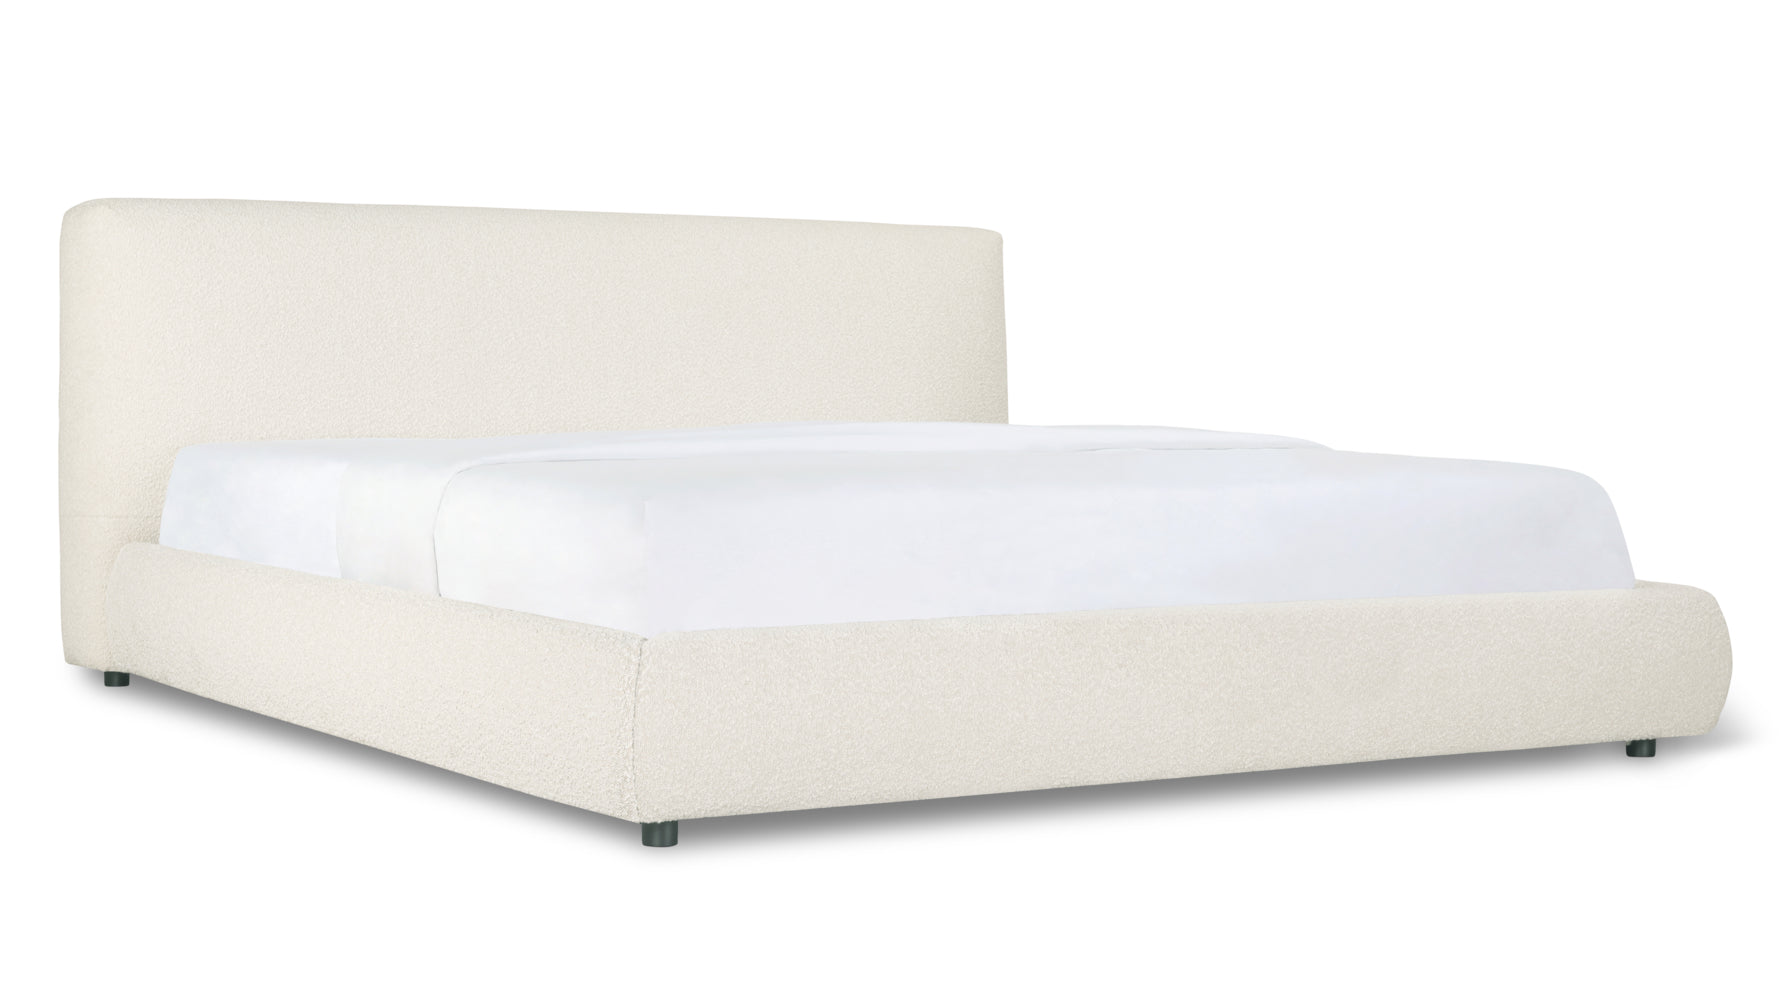 Dream Bed With Storage, Queen, Cream Boucle - Image 3